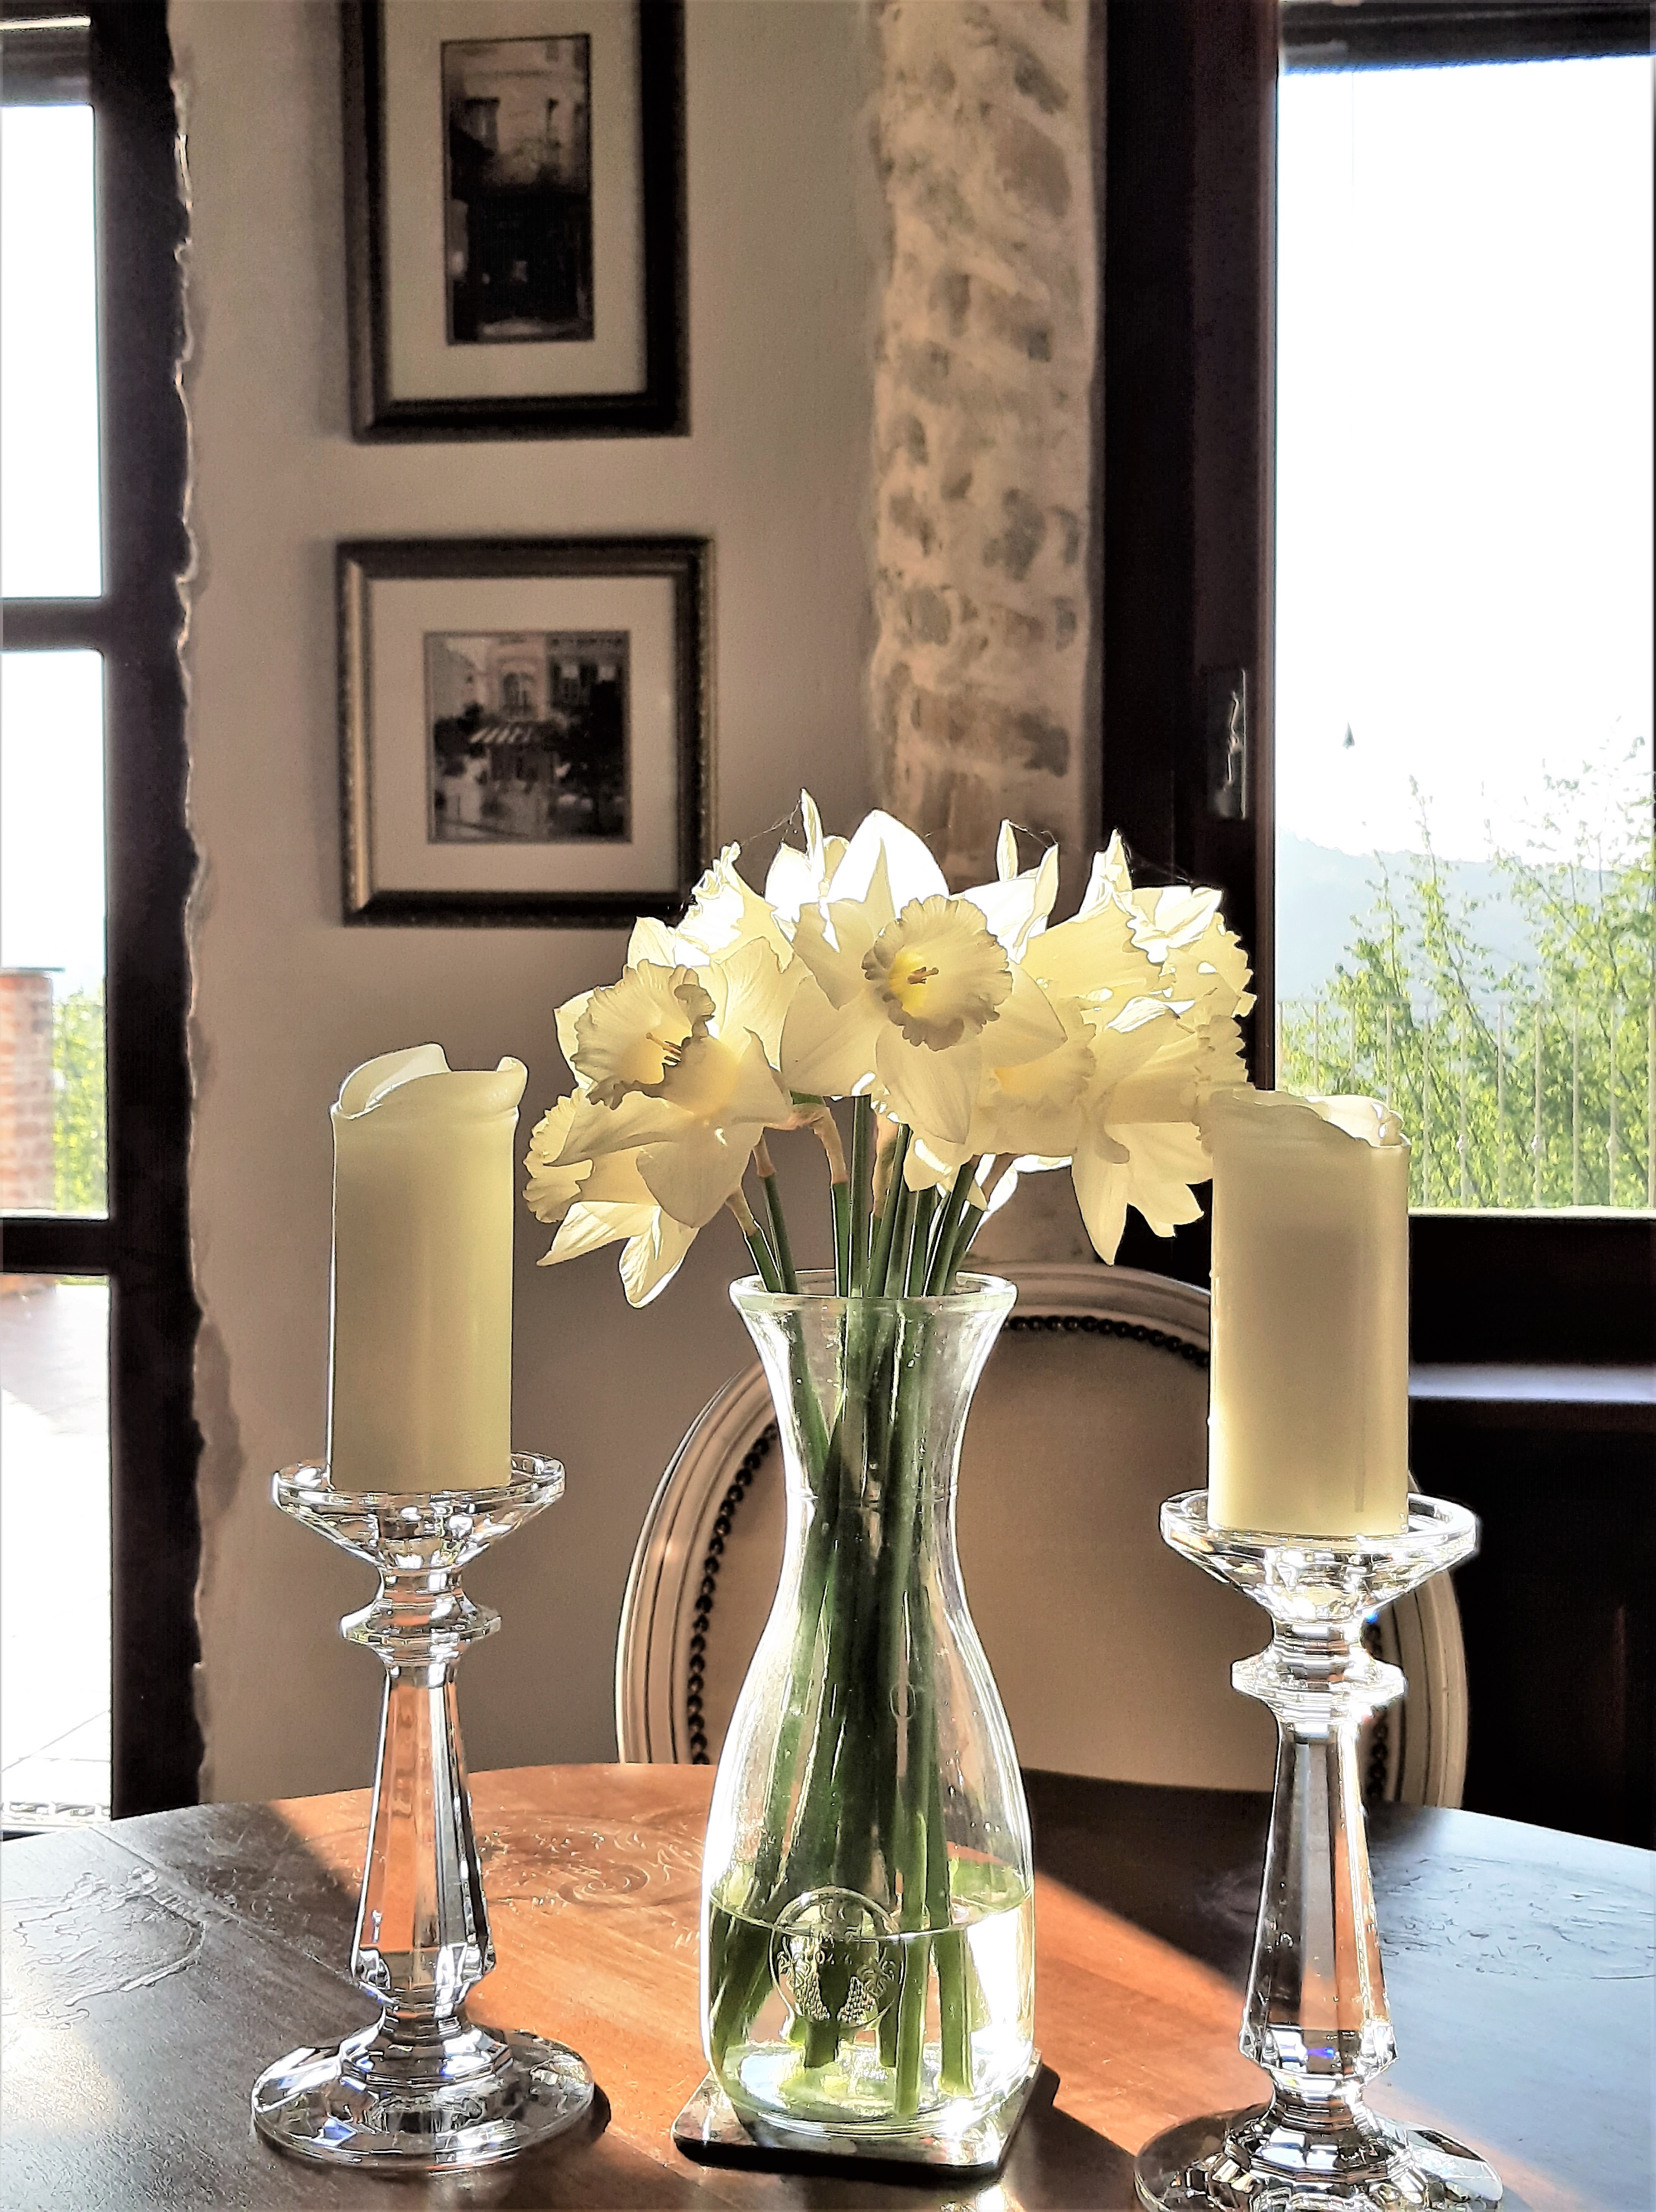 Piedmont holiday home dining area with fresh flowers in vase on table